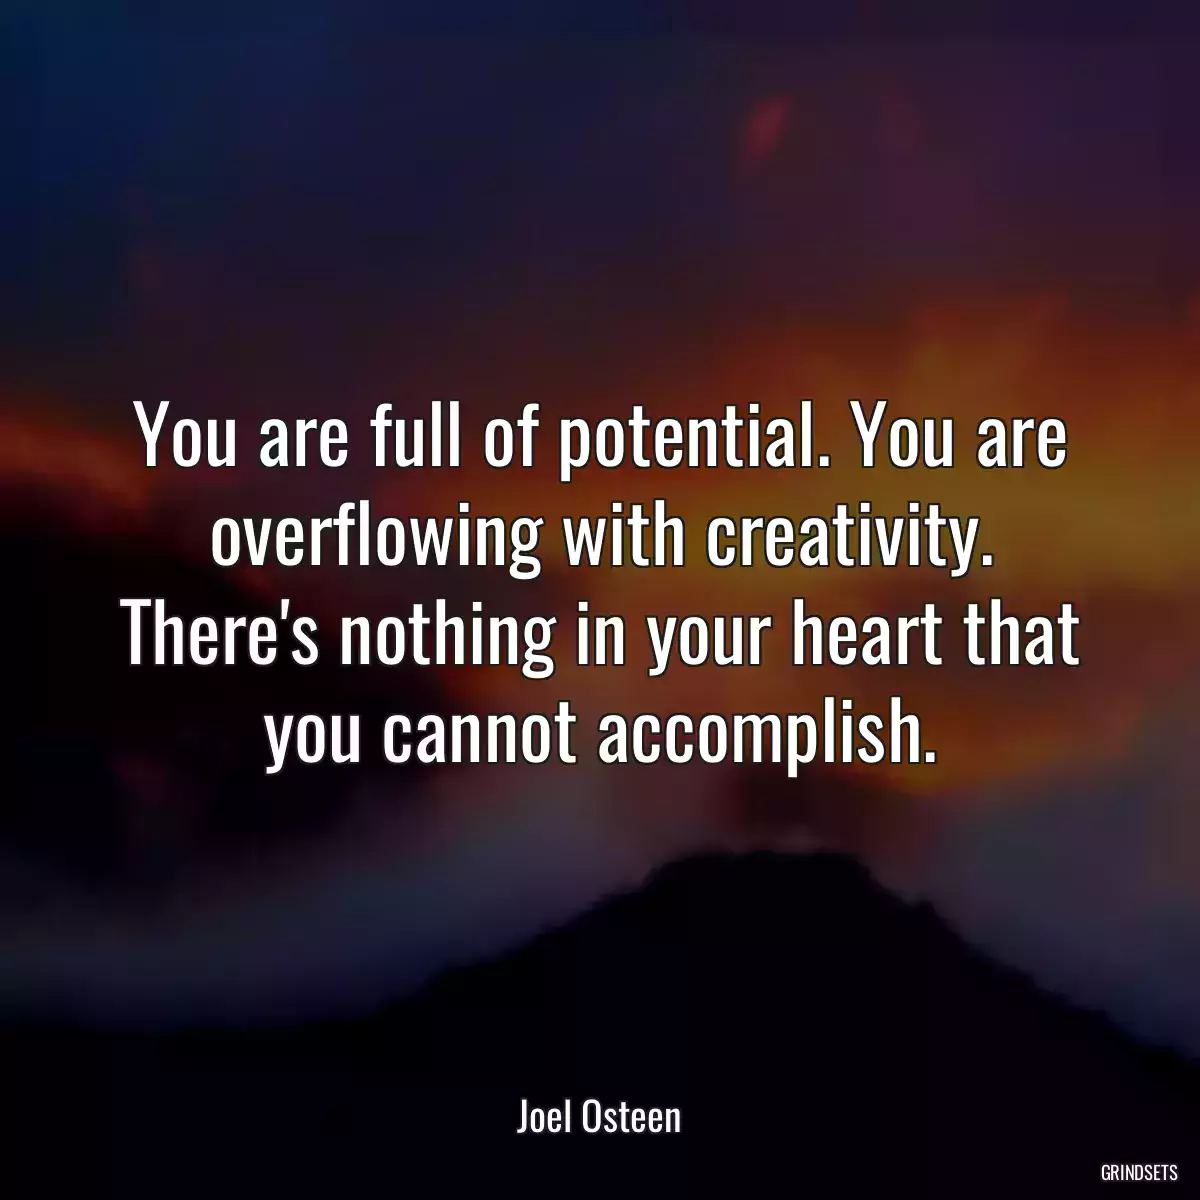 You are full of potential. You are overflowing with creativity. There\'s nothing in your heart that you cannot accomplish.